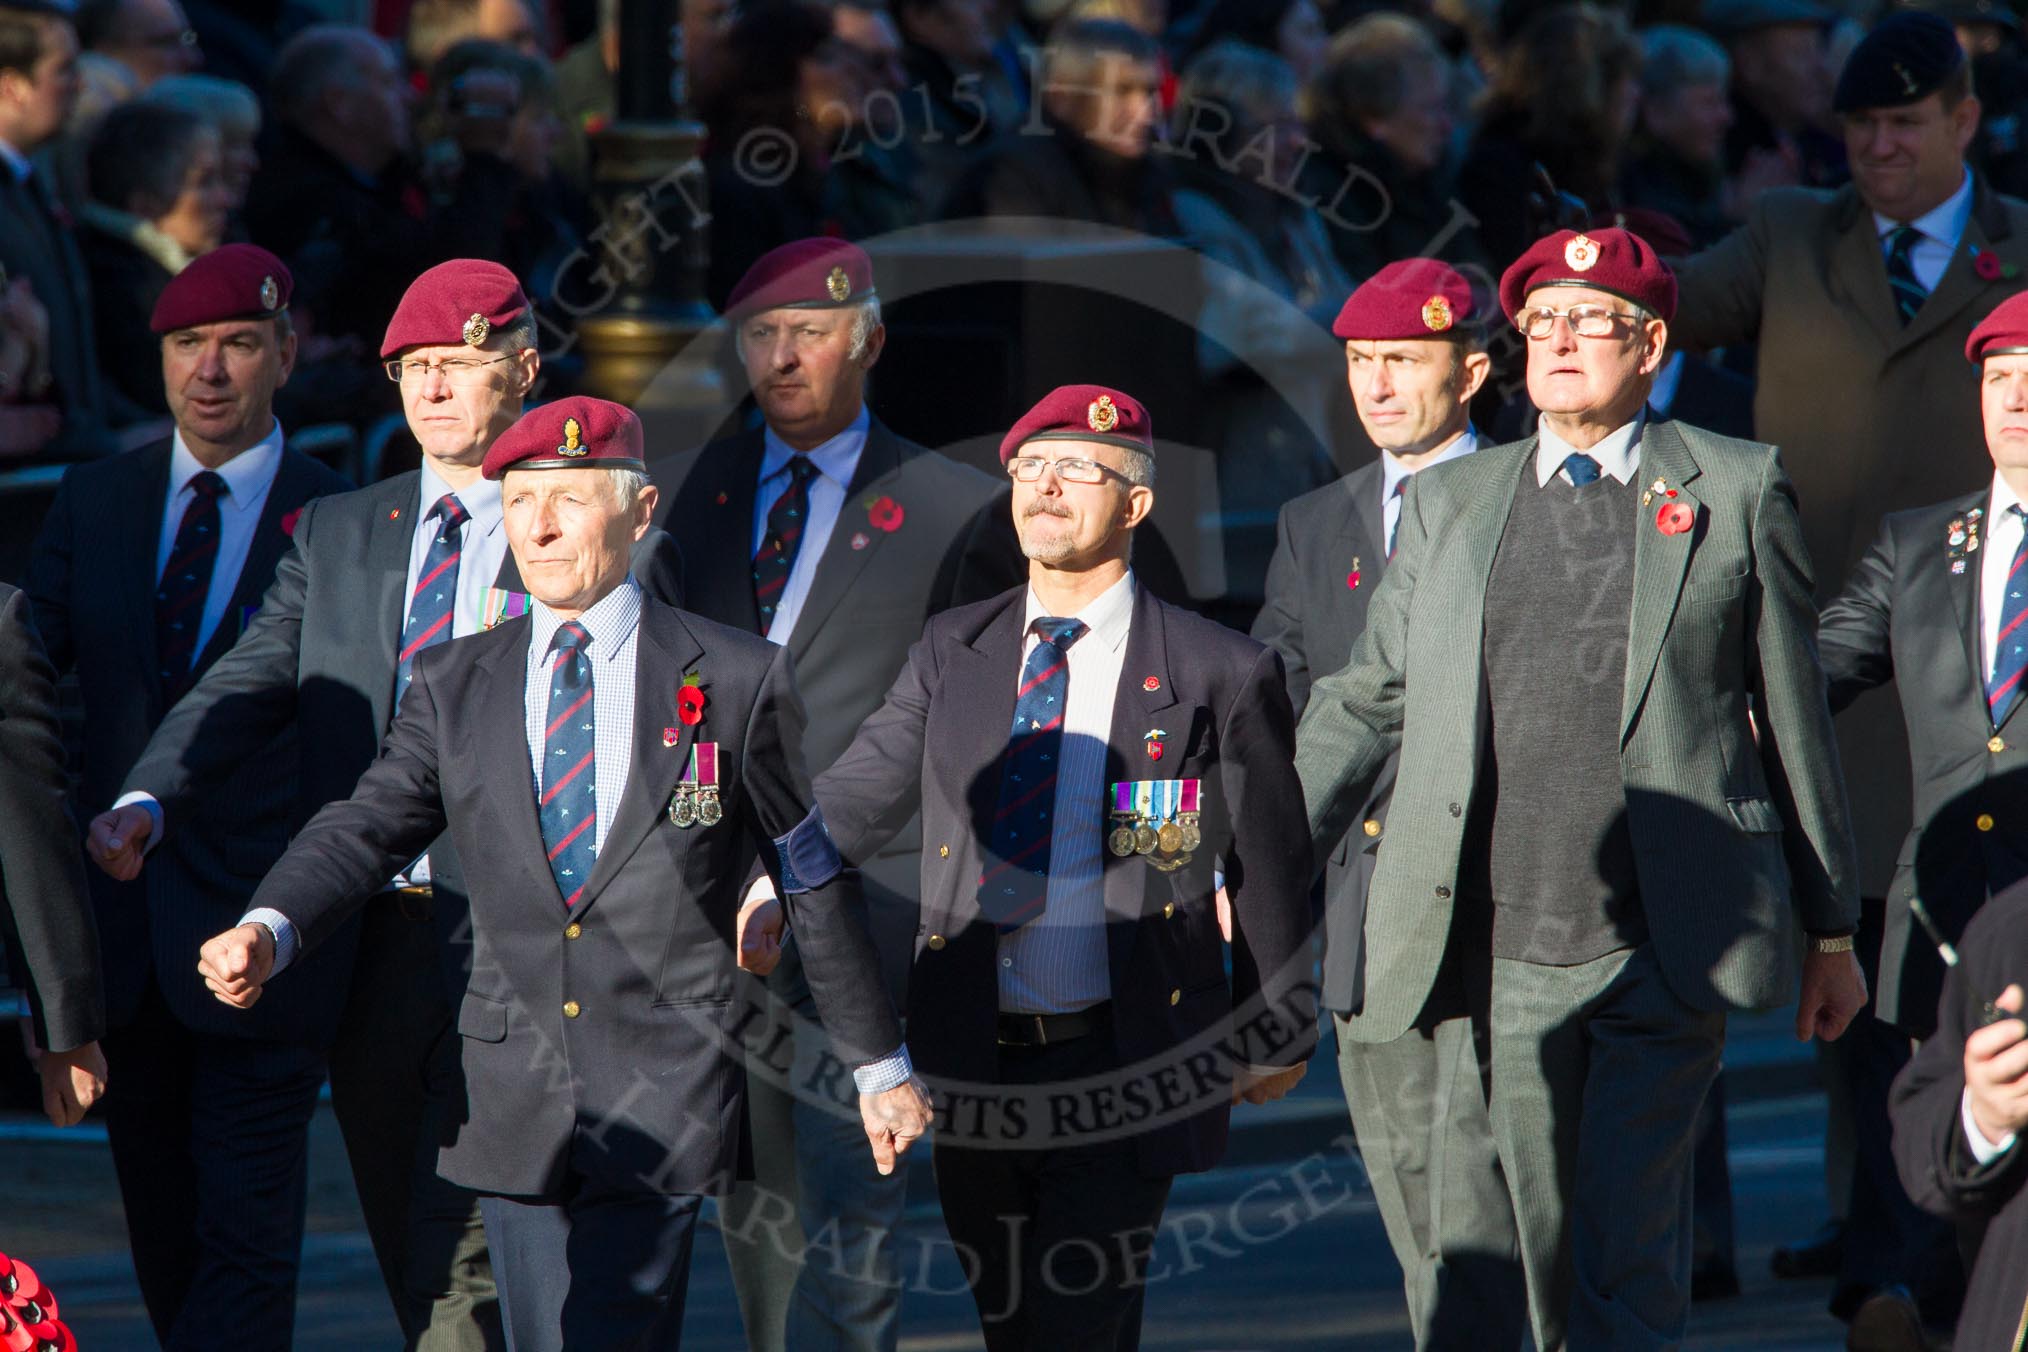 Remembrance Sunday Cenotaph March Past 2013: B22 - Airborne Engineers Association..
Press stand opposite the Foreign Office building, Whitehall, London SW1,
London,
Greater London,
United Kingdom,
on 10 November 2013 at 12:02, image #1488